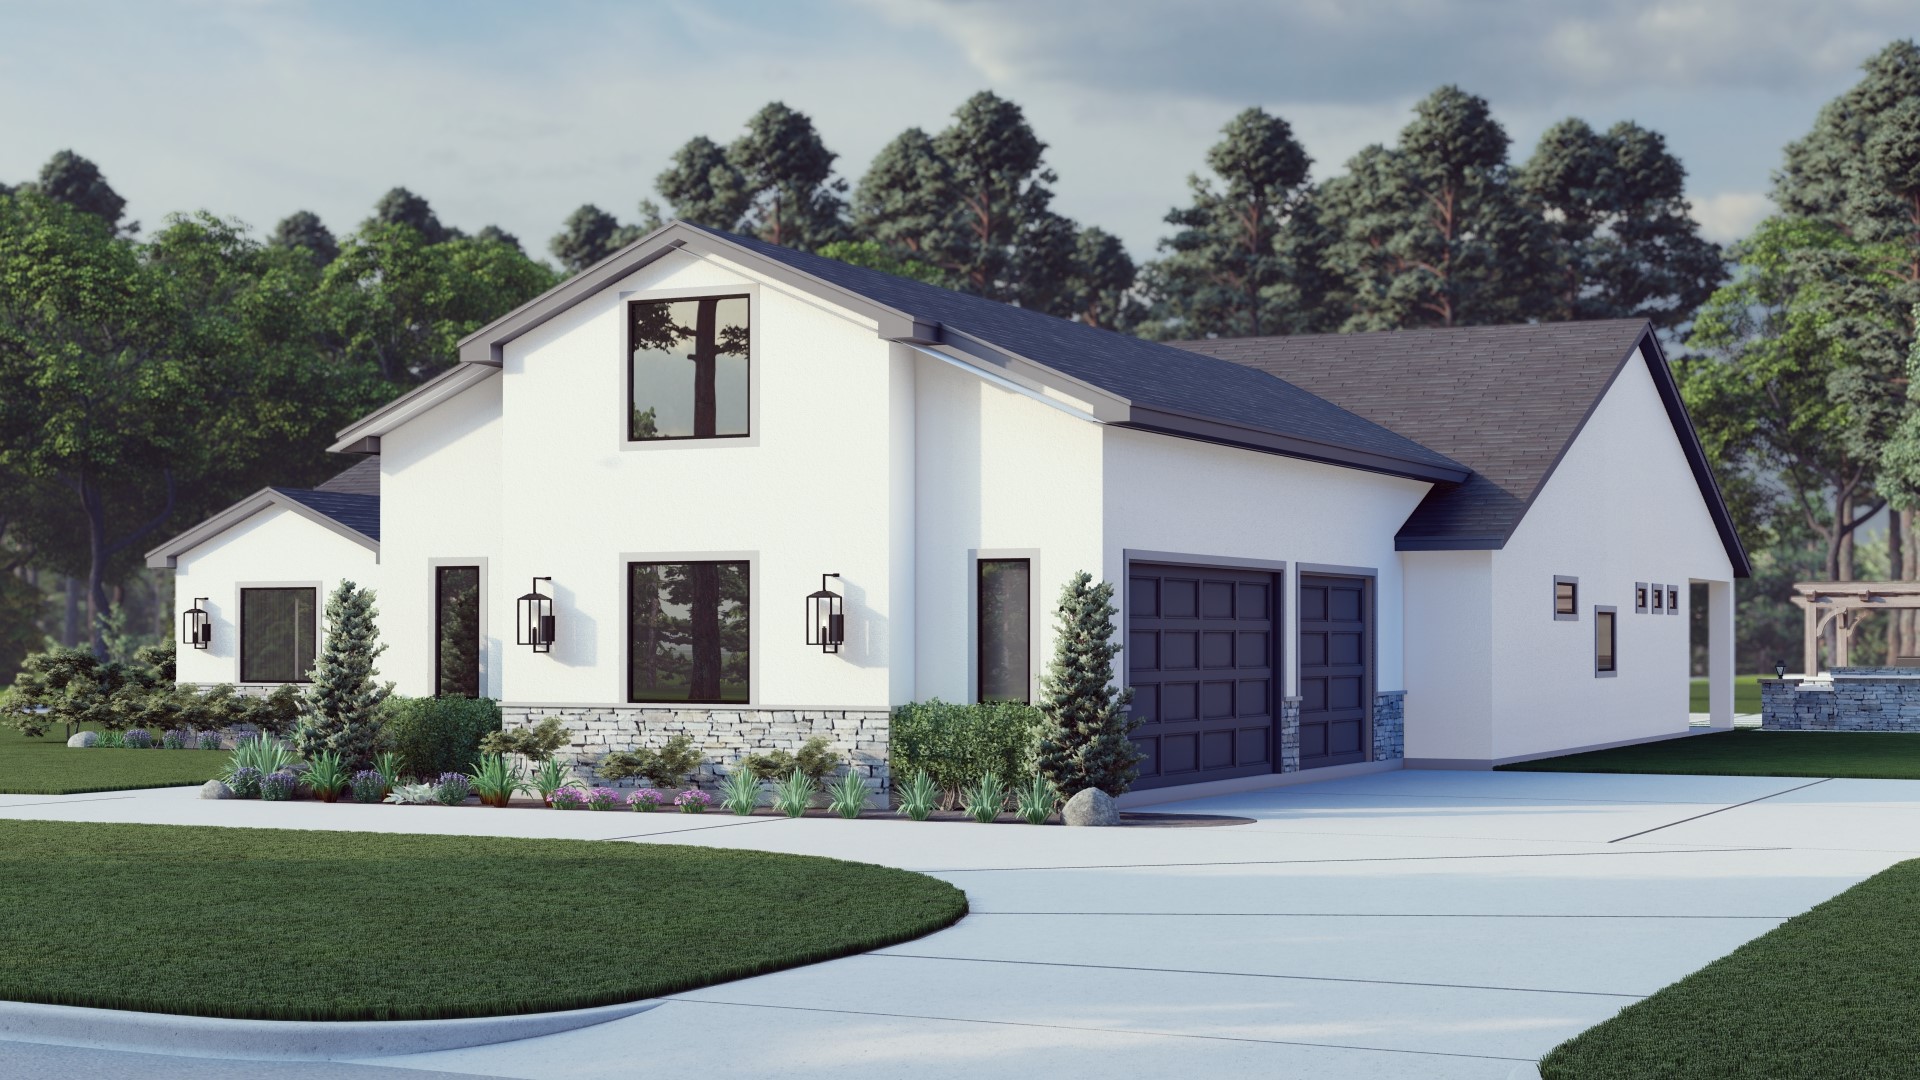 3 car garage.  *Pictured with additional bonus room above garage, not included in sq ft.